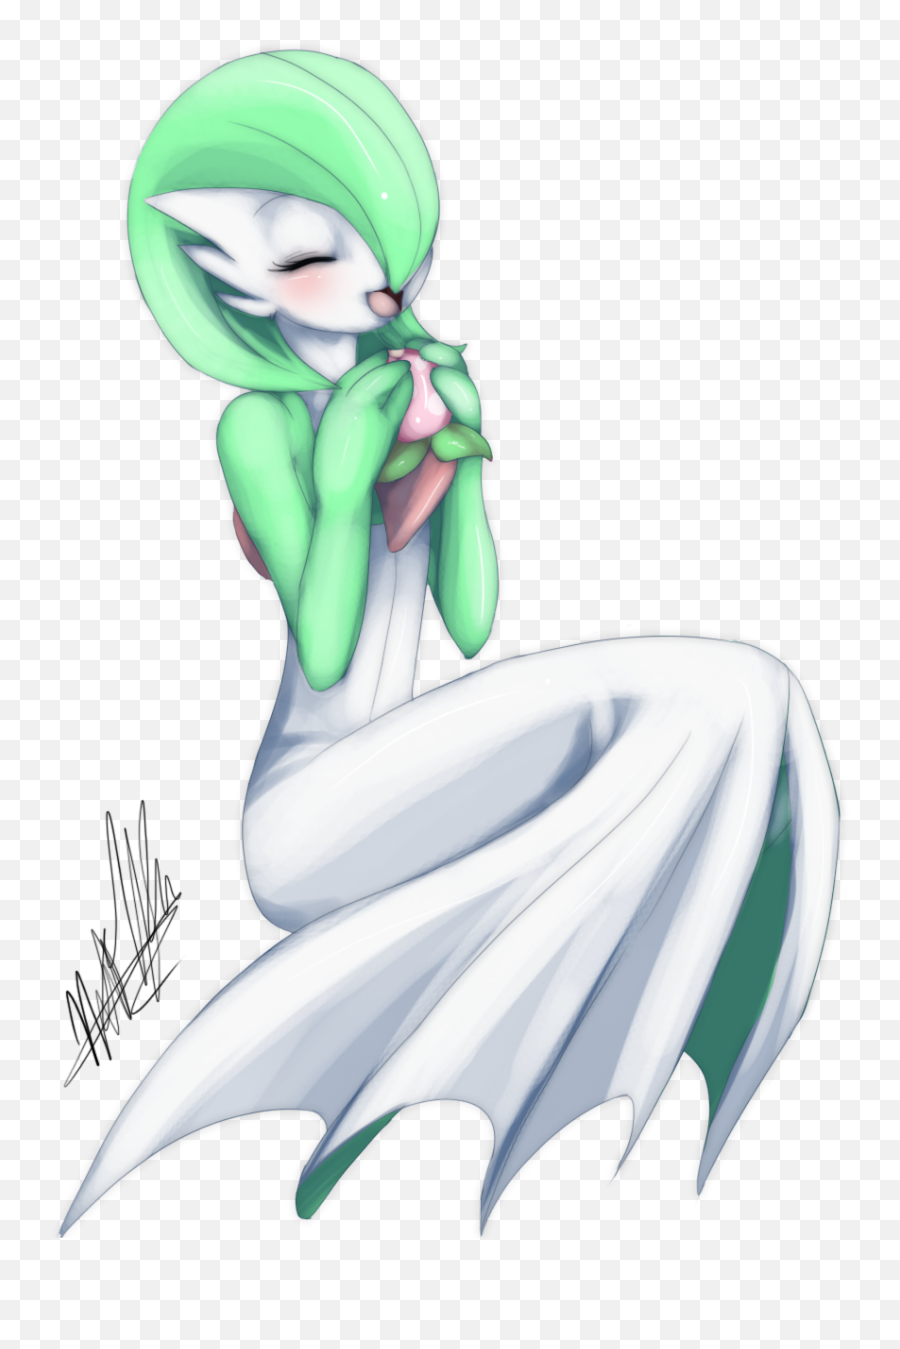 Options - Gardevoir Full Size Png Download Seekpng Statue Of Liberty Lewd,Gardevoir Png